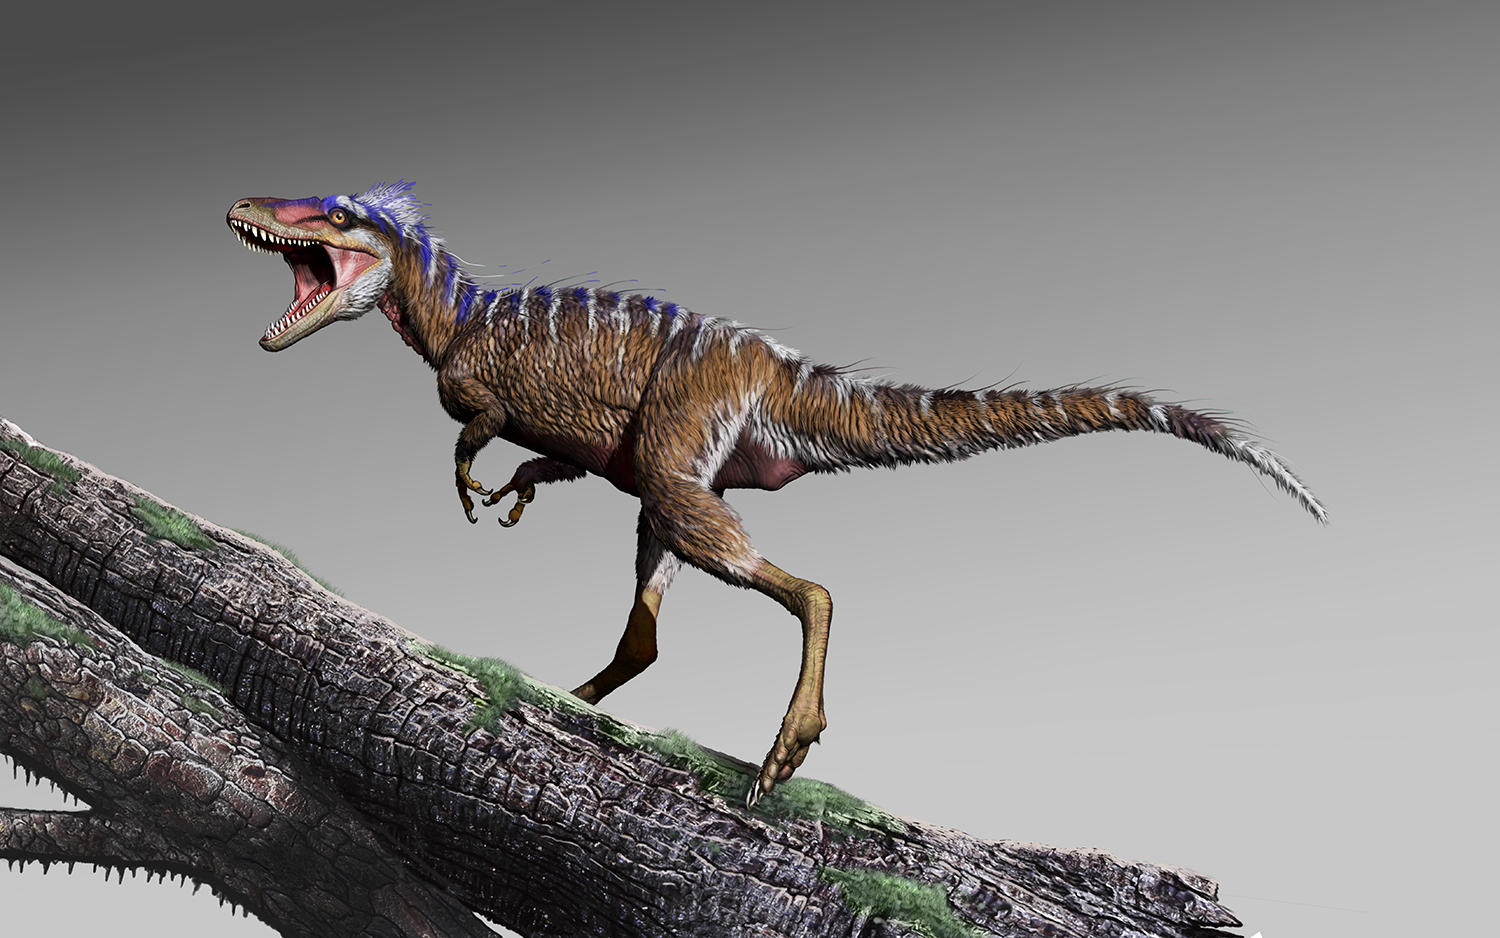 8 Facts About the Fearsome T. Rex